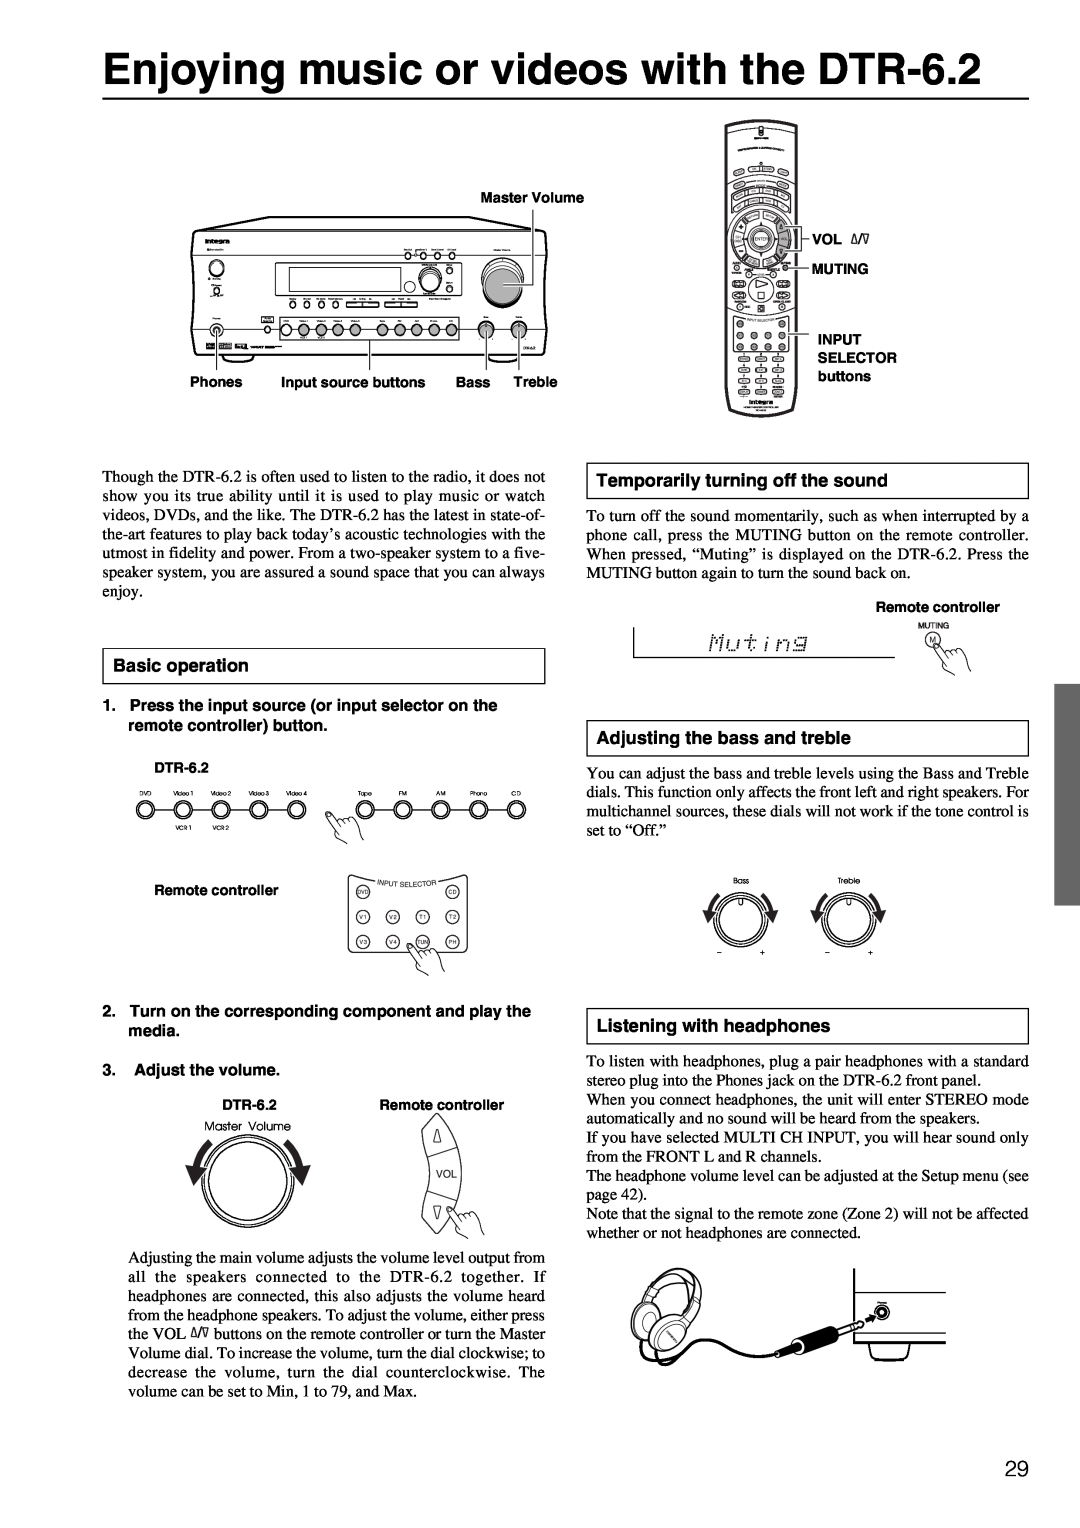 Integra instruction manual Enjoying music or videos with the DTR-6.2, Temporarily turning off the sound, Basic operation 